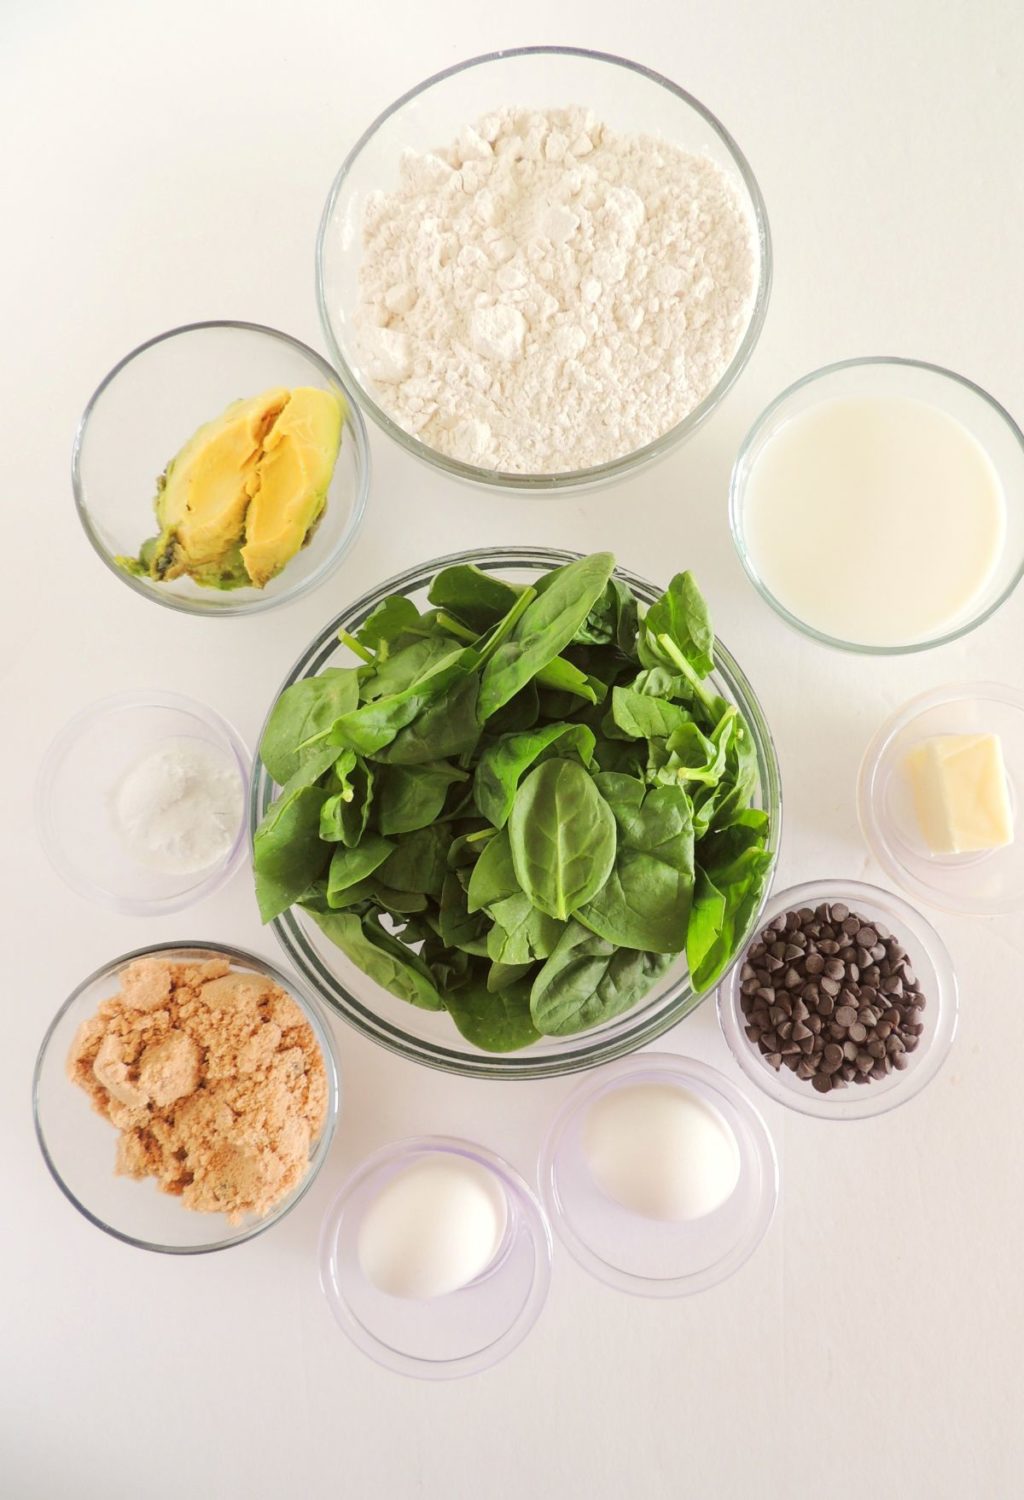 Ingredients for a spinach and chocolate cake.